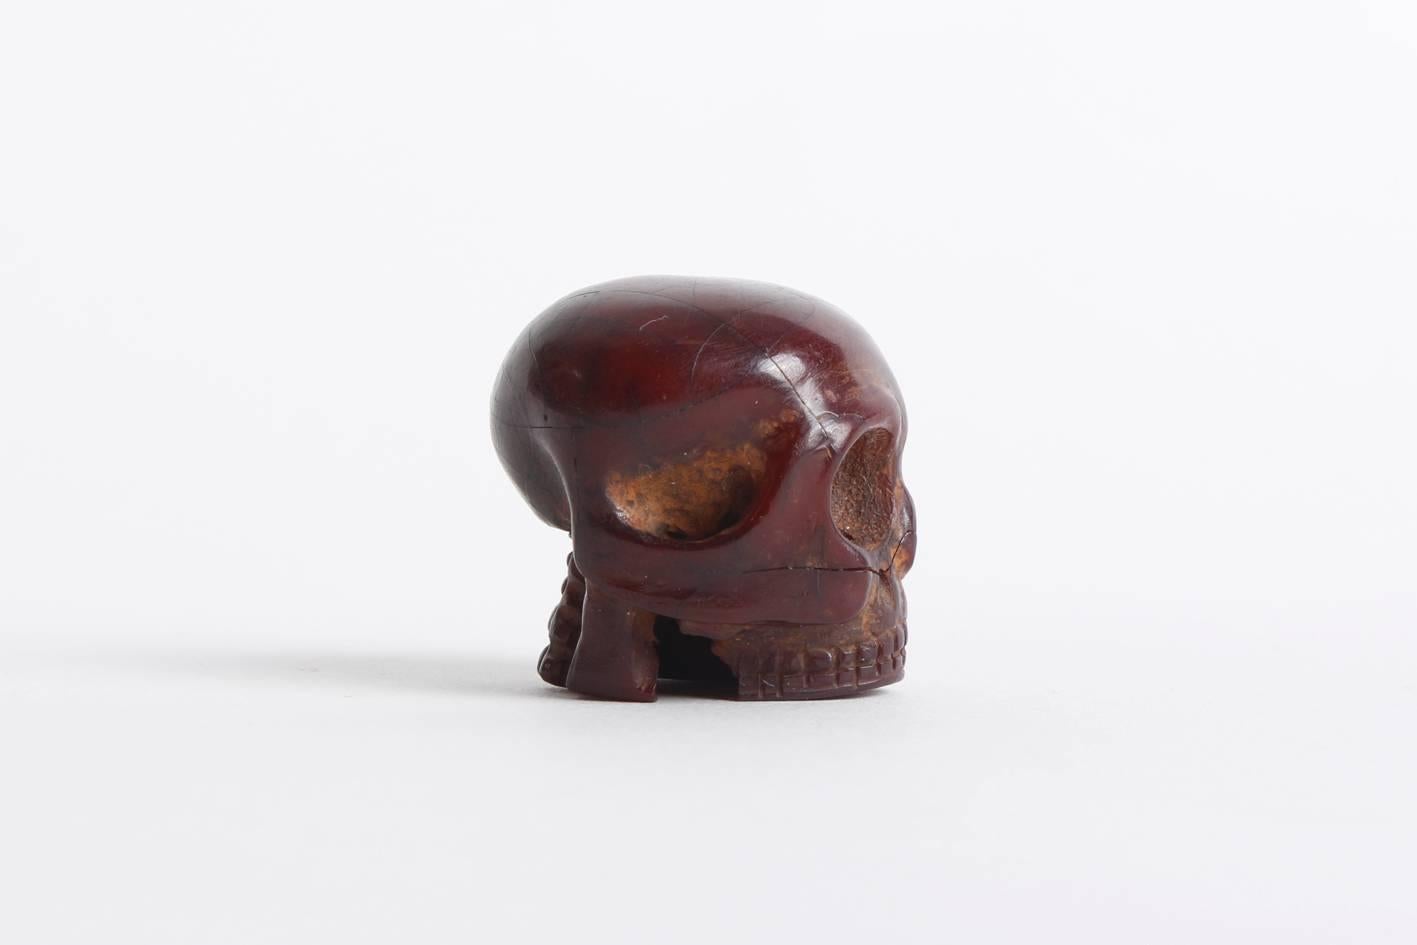 Finely carved amber, probably Japan, circa 1800, Tokugawa period.

Please find our other skull miniatures listed here on 1stdibs.